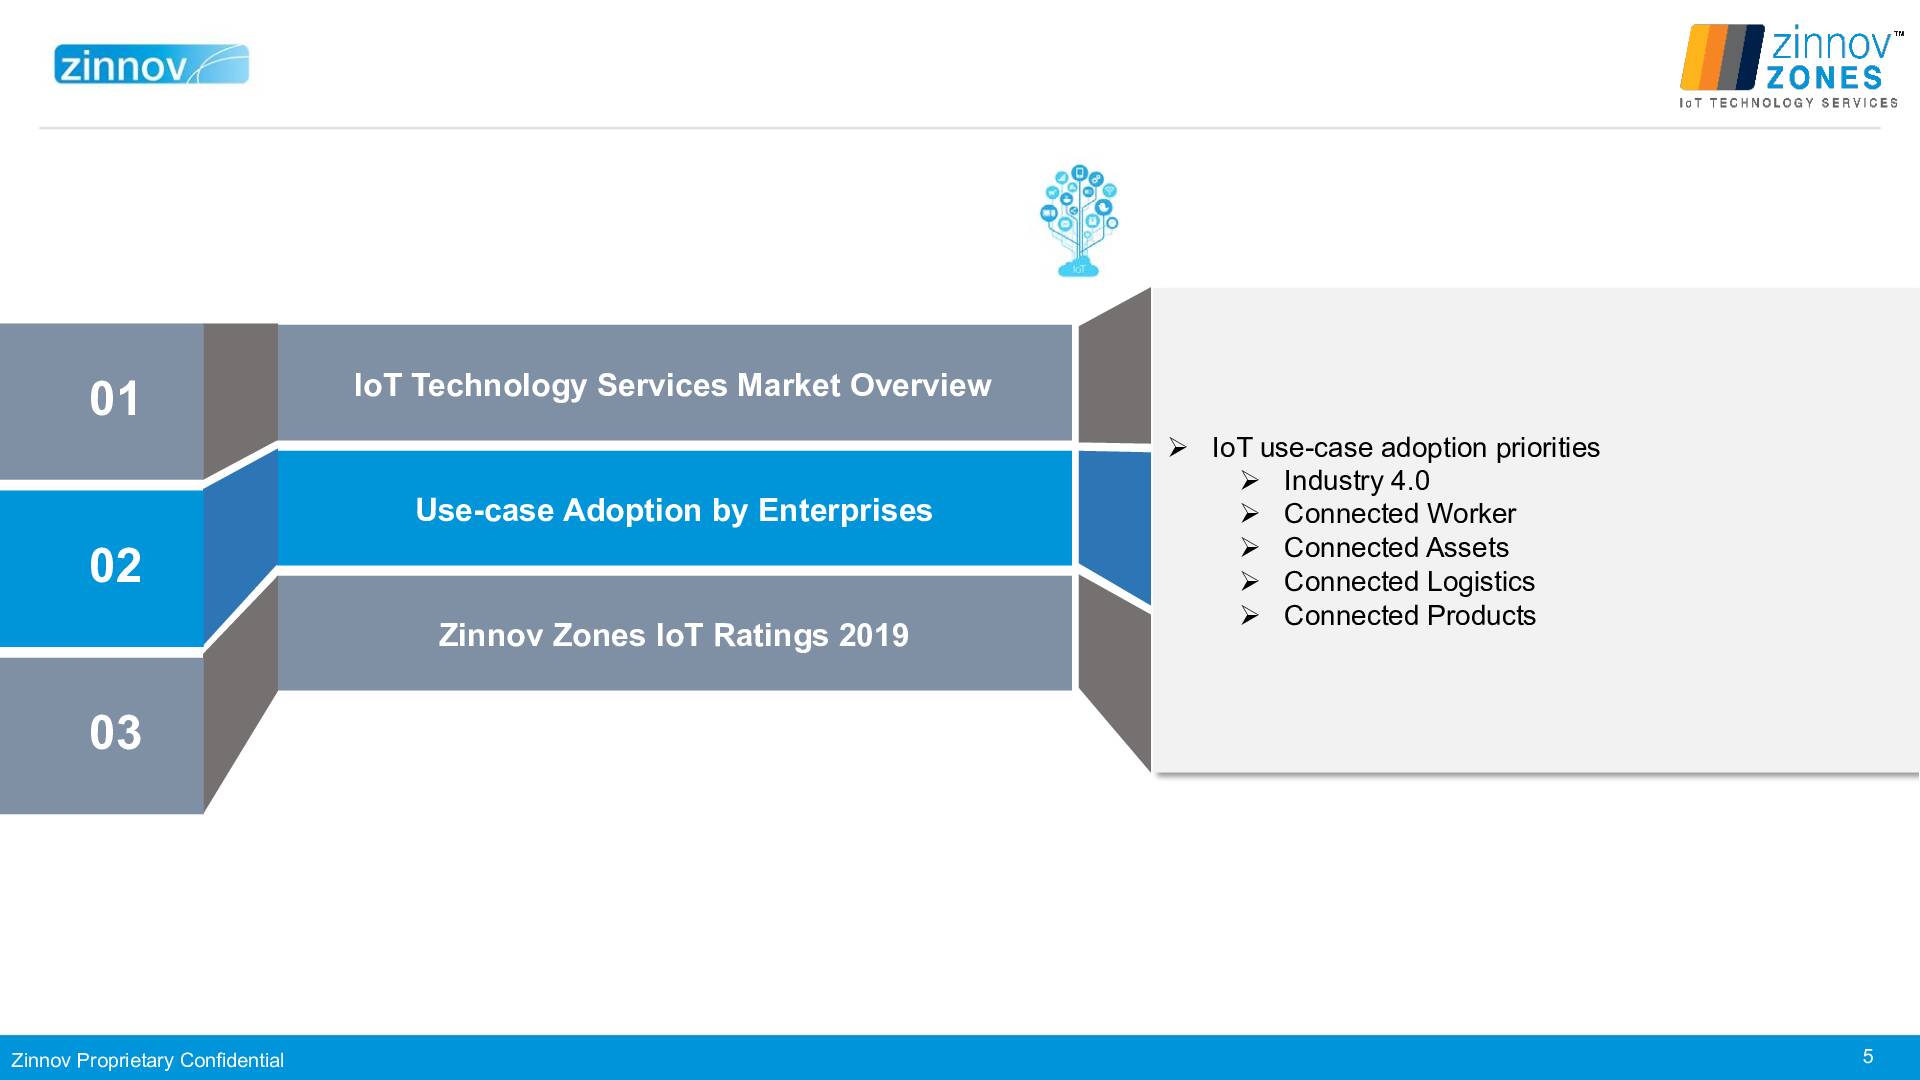 Zinnov Zones Iot Technology Services 2019 Ratings5